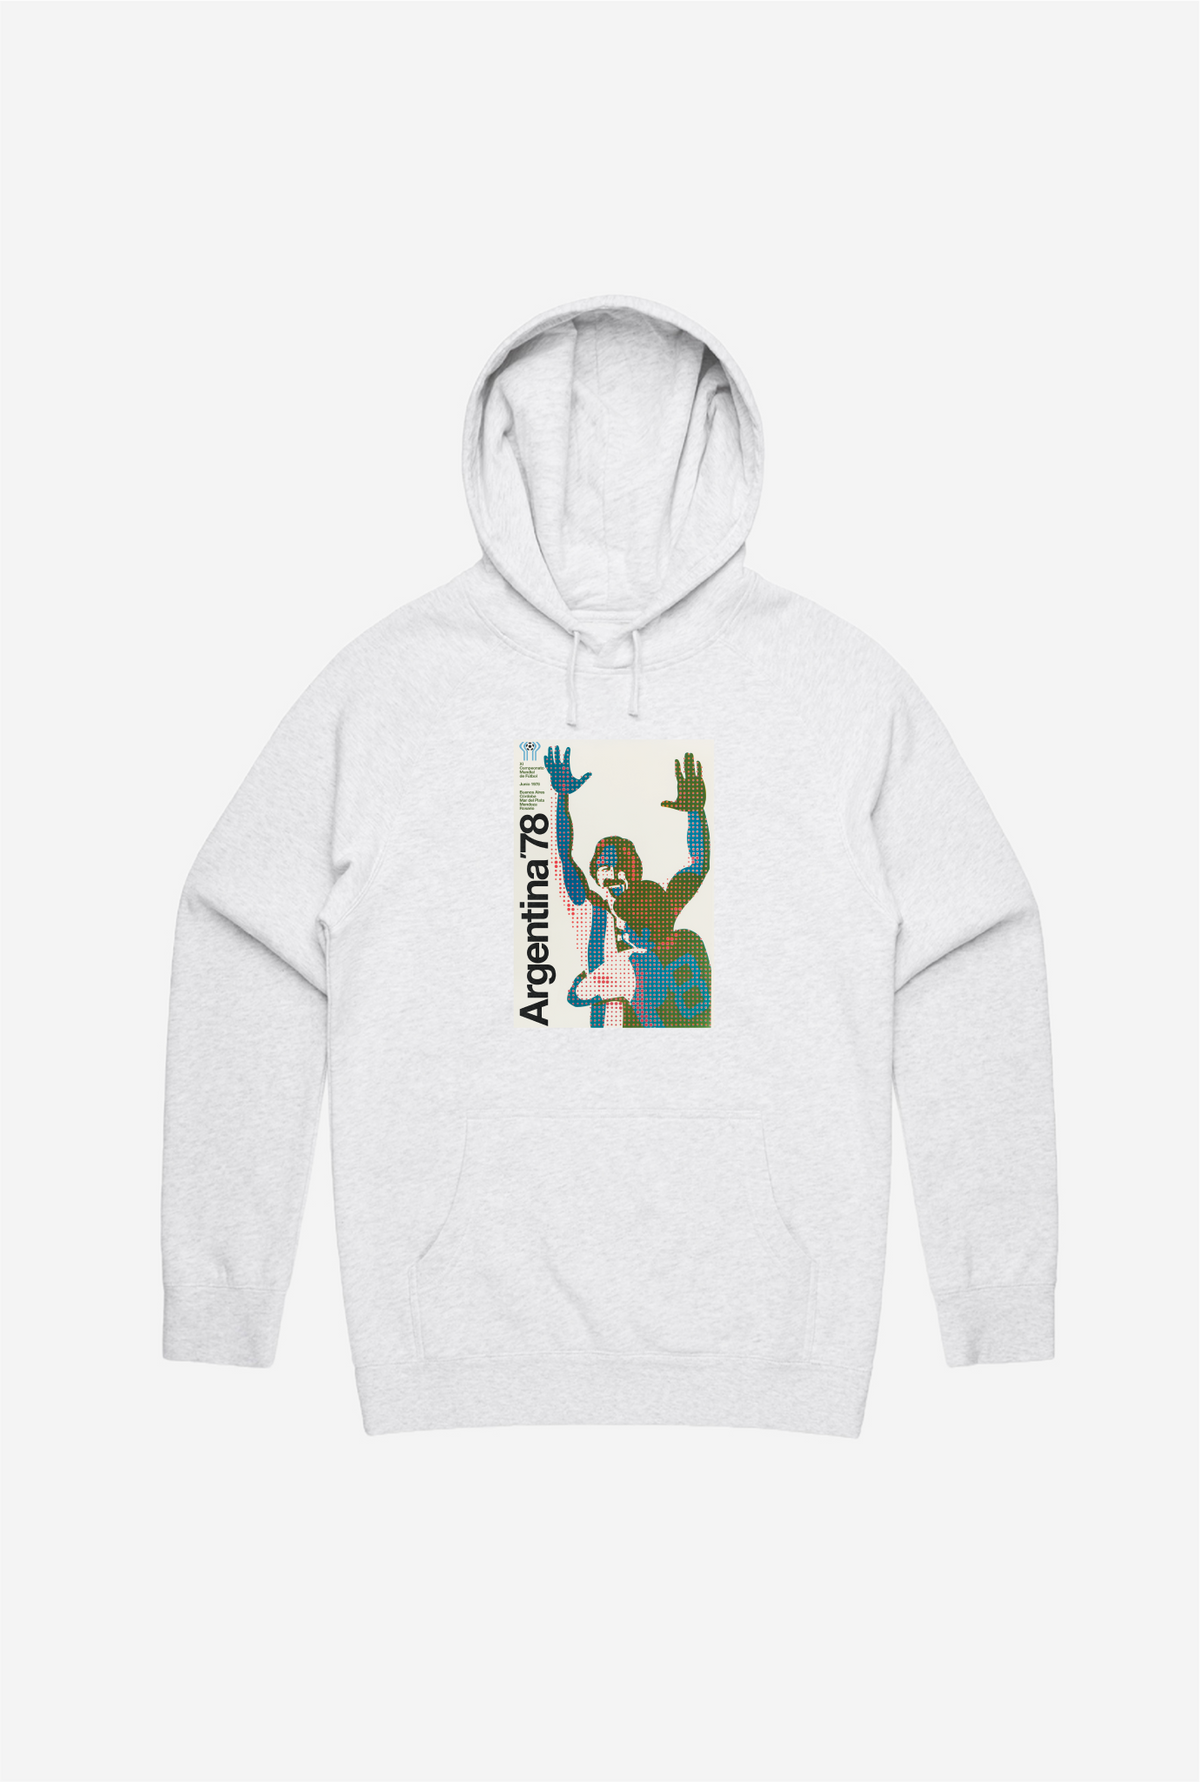 FIFA World Cup Argentina 1978 Poster Hoodie - Ash